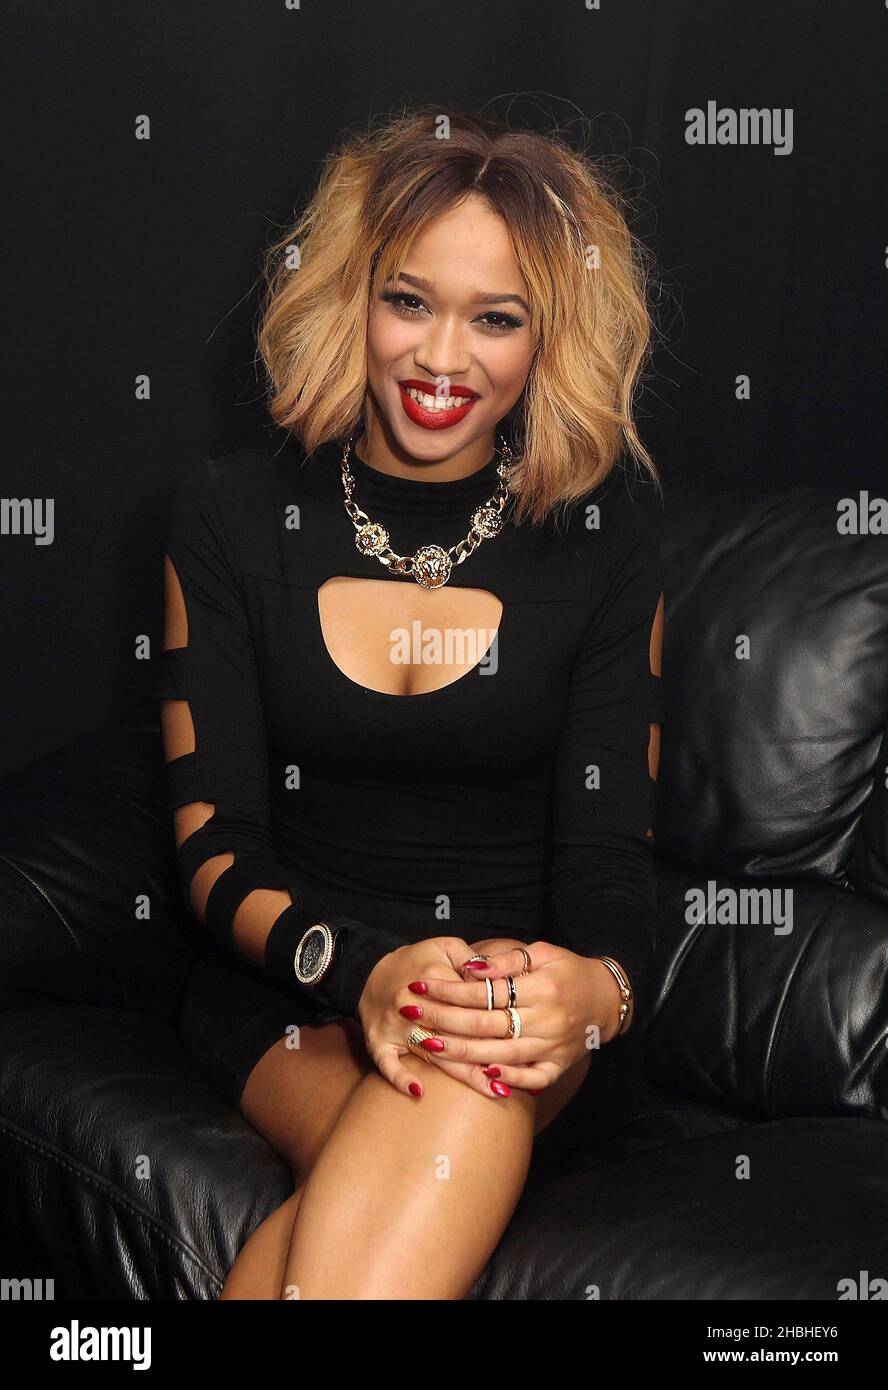 Tamera Foster X Factor Contestant poses backstage at G-A-Y Heaven in London. Stock Photo